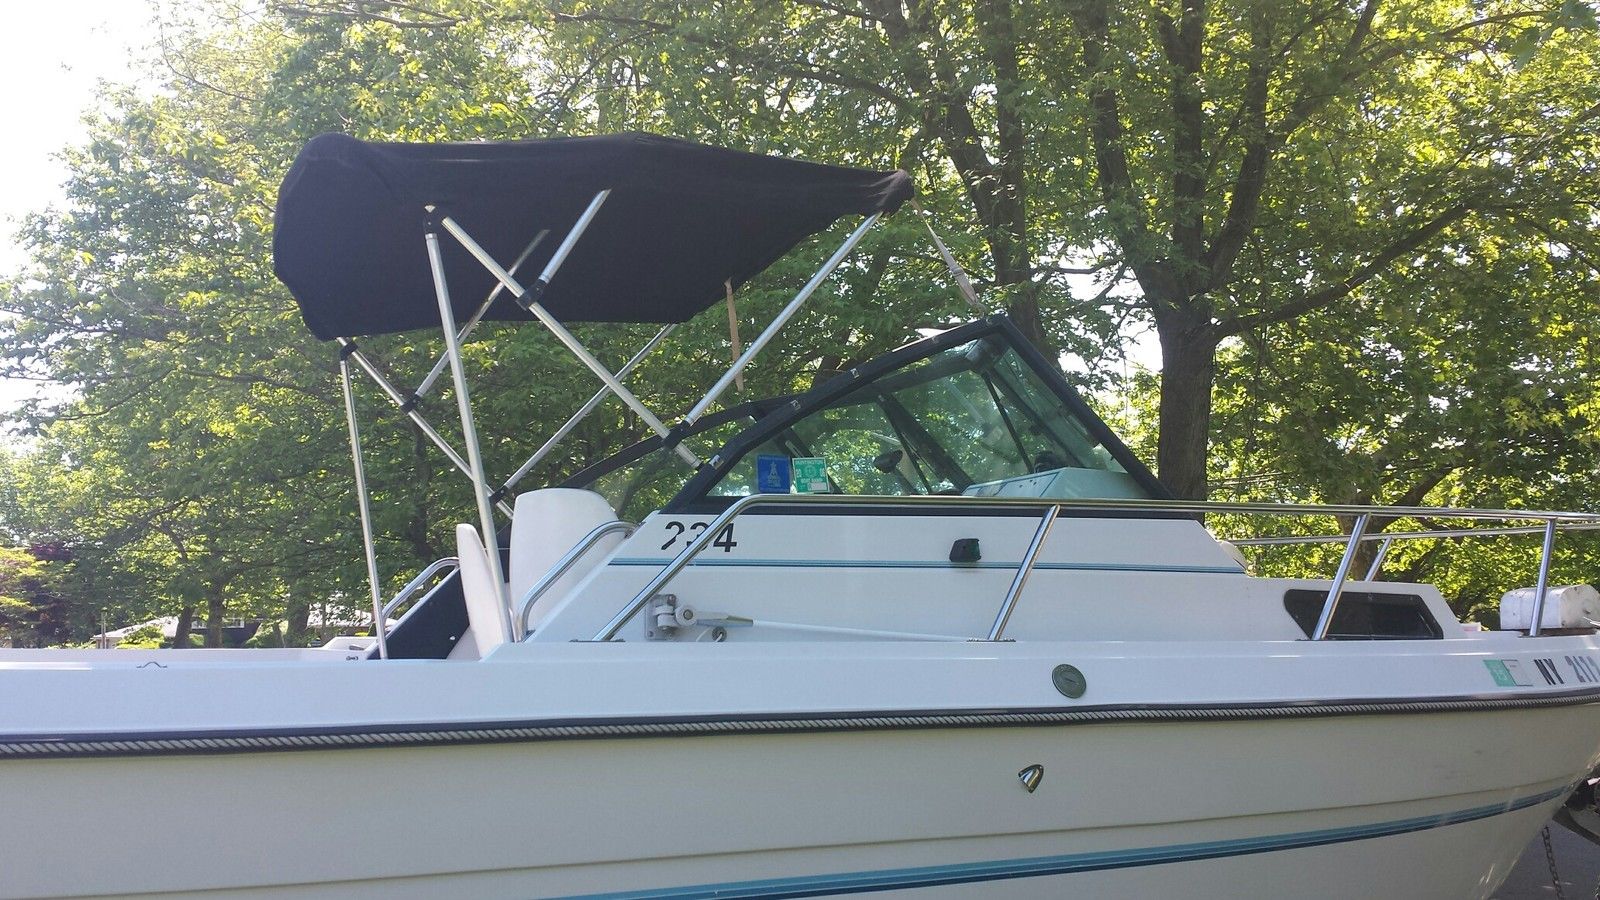 Chaparral 234 Fishing Boat 1989 for sale for $4,199 - Boats-from-USA.com